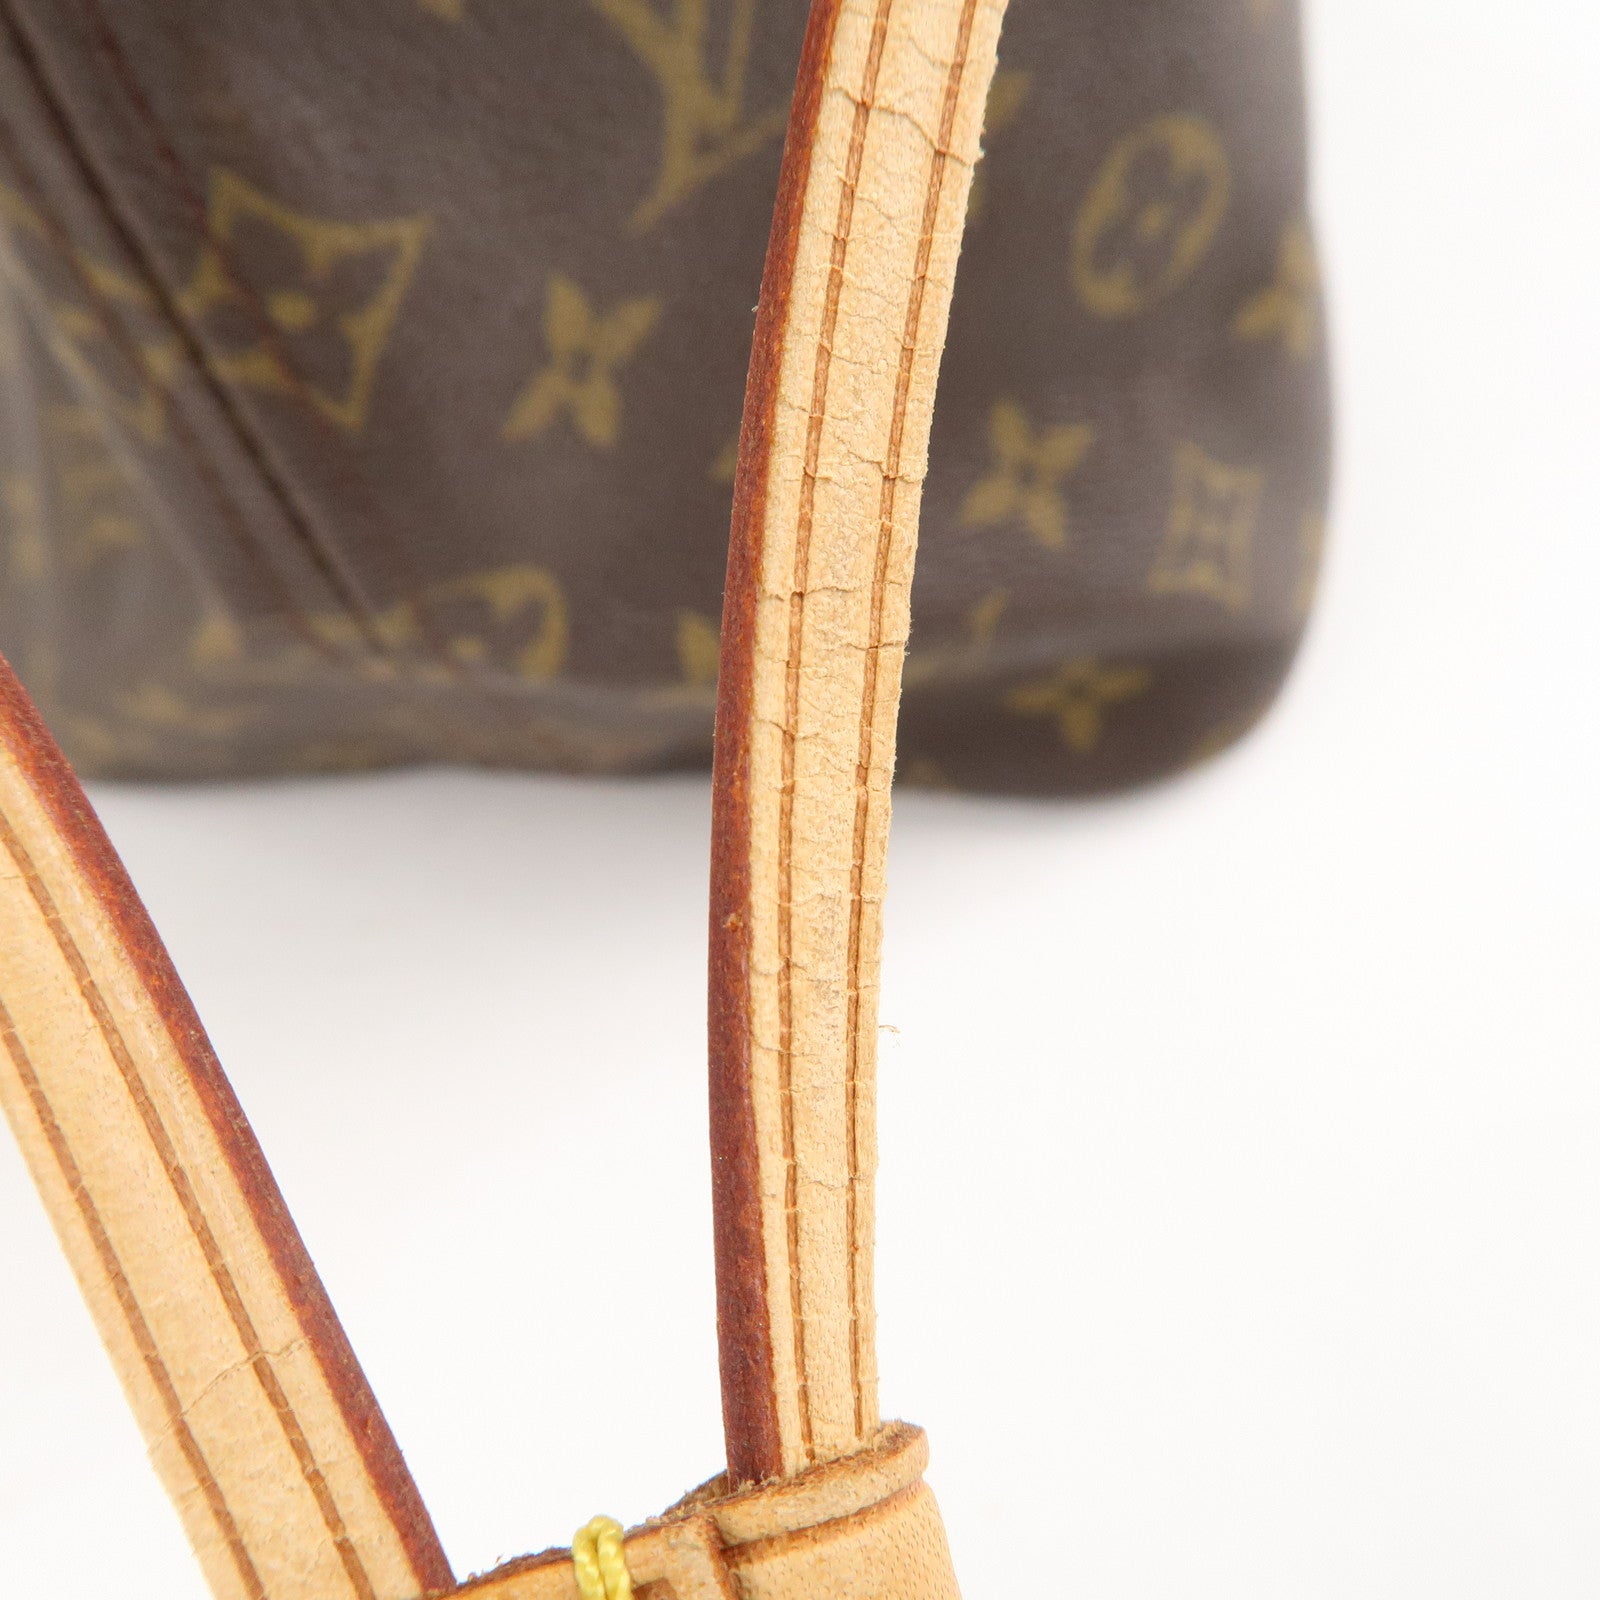 Louis Vuitton Neverfull GM M40157 Monogram Canvas Tote. With small